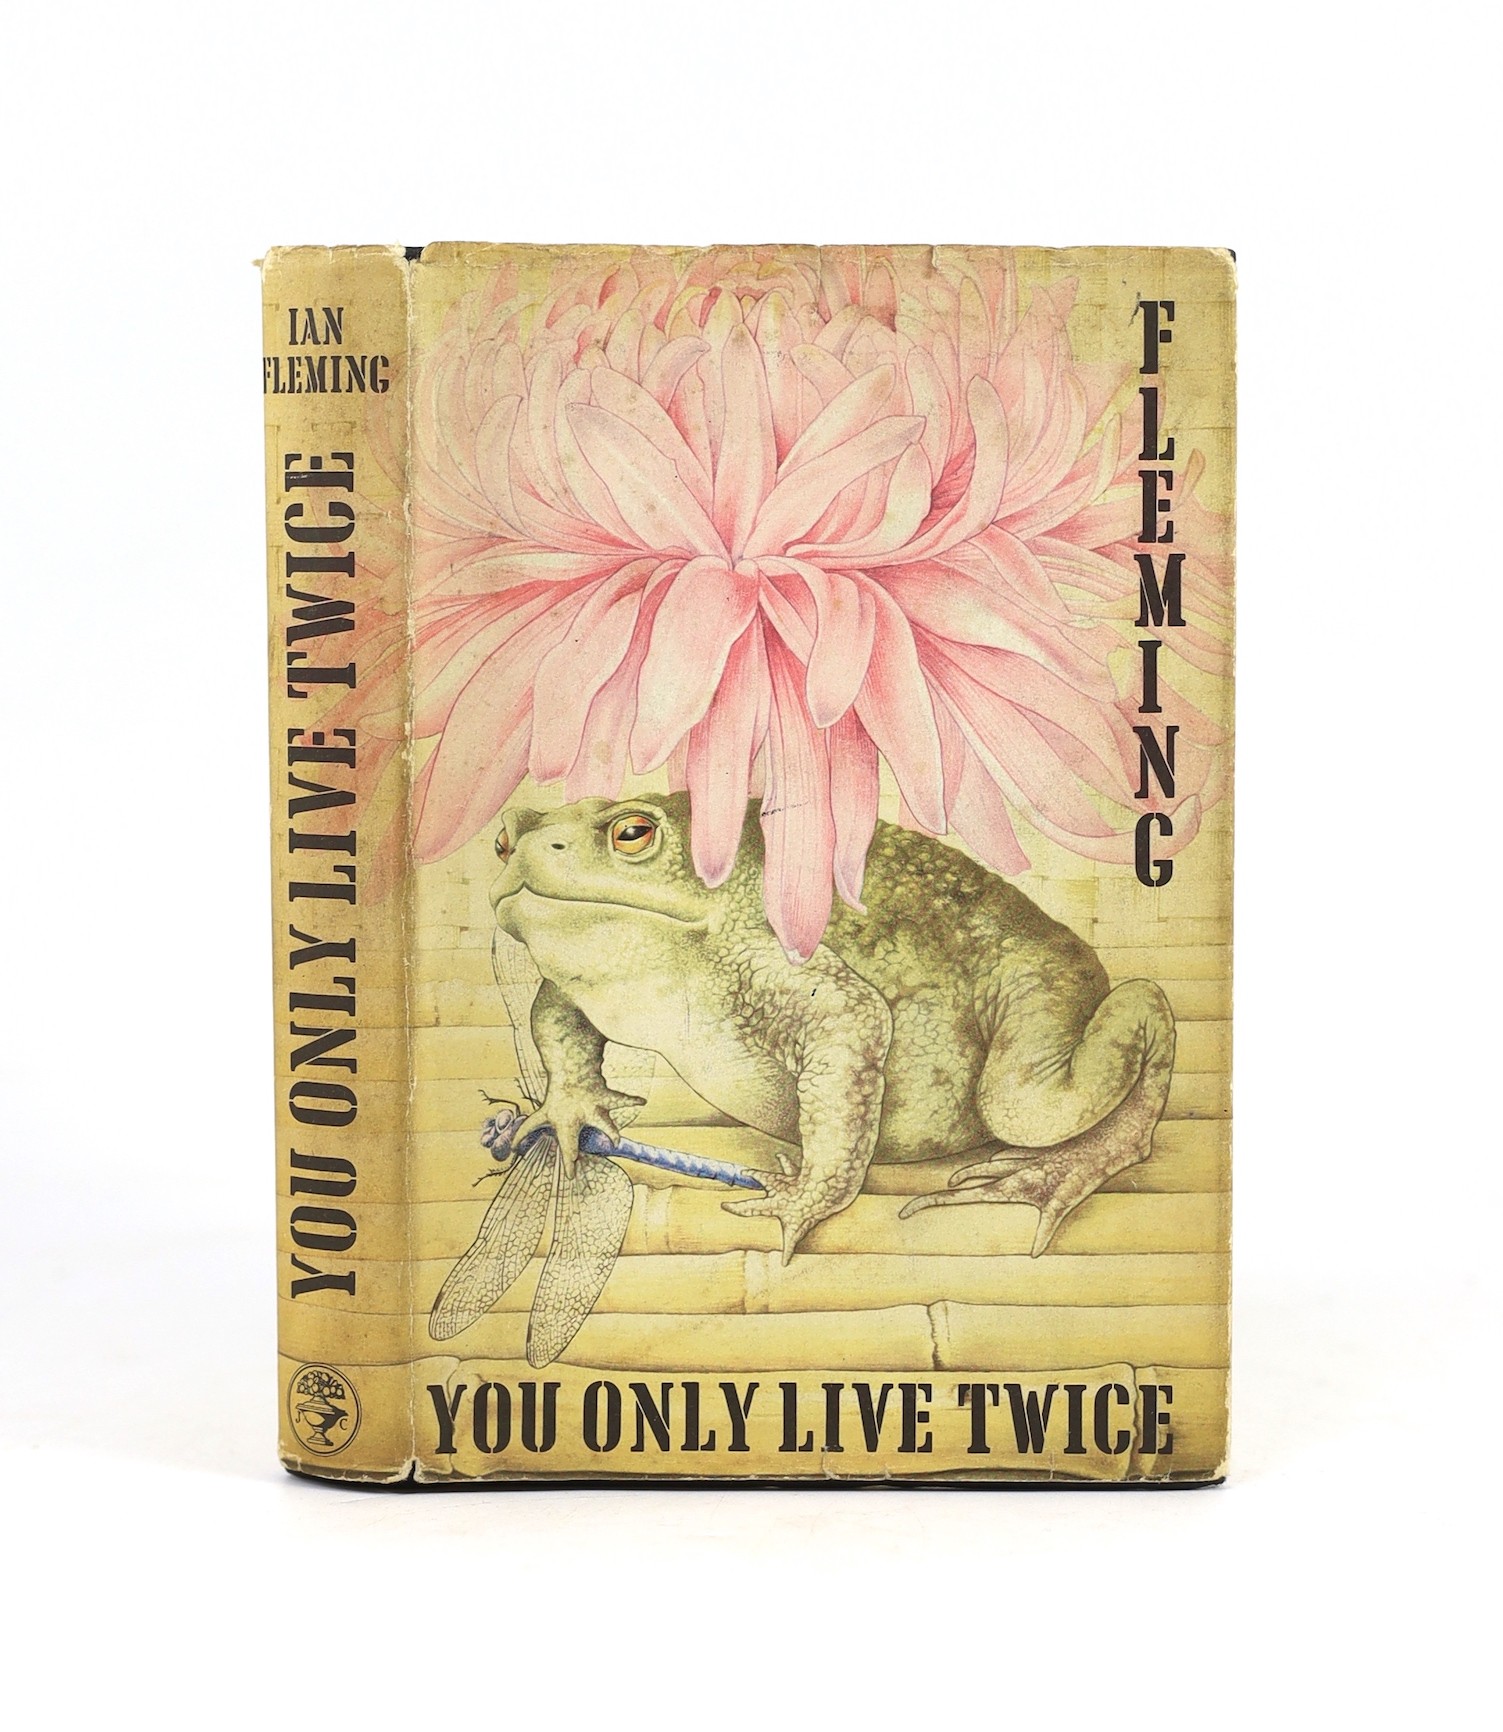 Fleming, Ian - You Only Live Twice, 1st edition, 8vo, cloth in unclipped d/j, Jonathan Cape, London, 1964